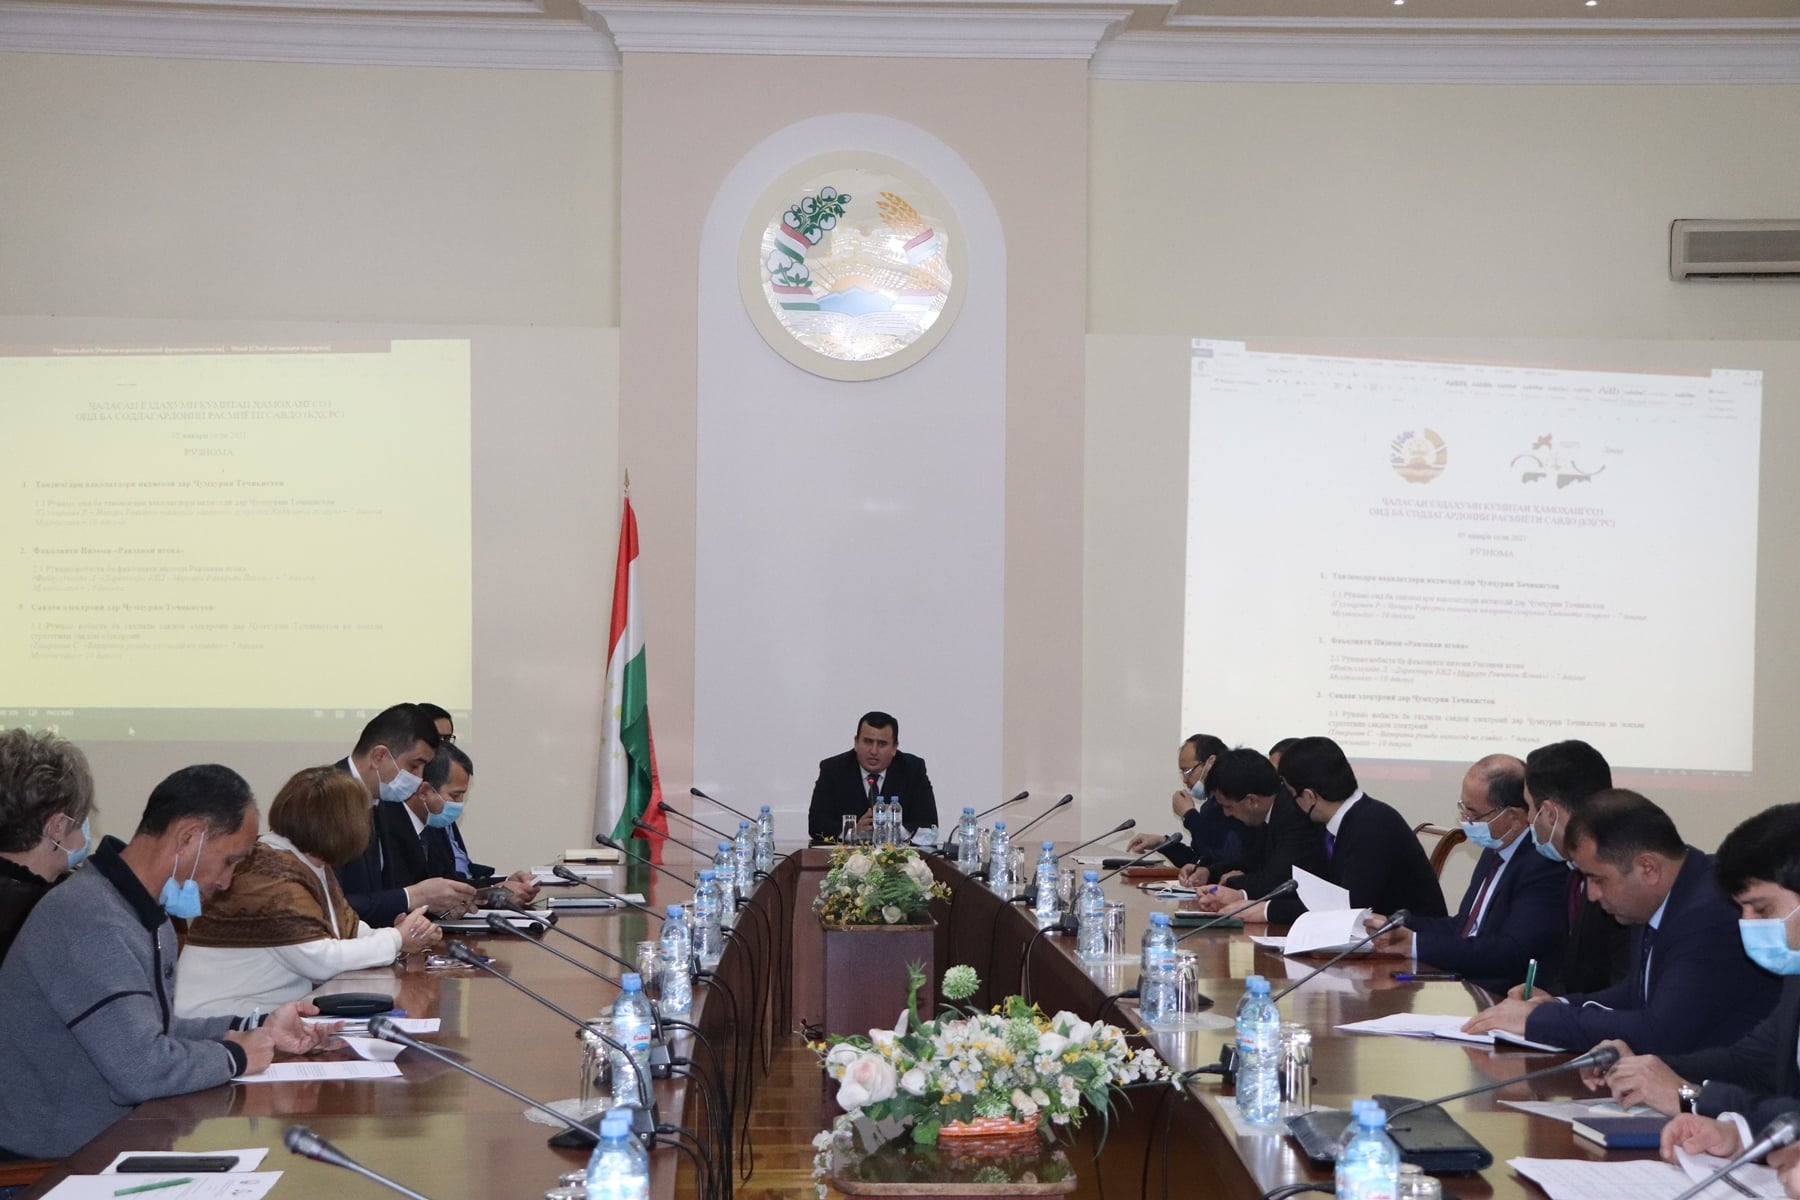 Eleventh meeting of the Coordinating Committee on Facilitation of  Trade Procedures (CCFTP) and the fifth meeting of the Steering Committee of the "Regional Economic Cooperation in Central Asia on Improving the Activities of Border Agencies" Project